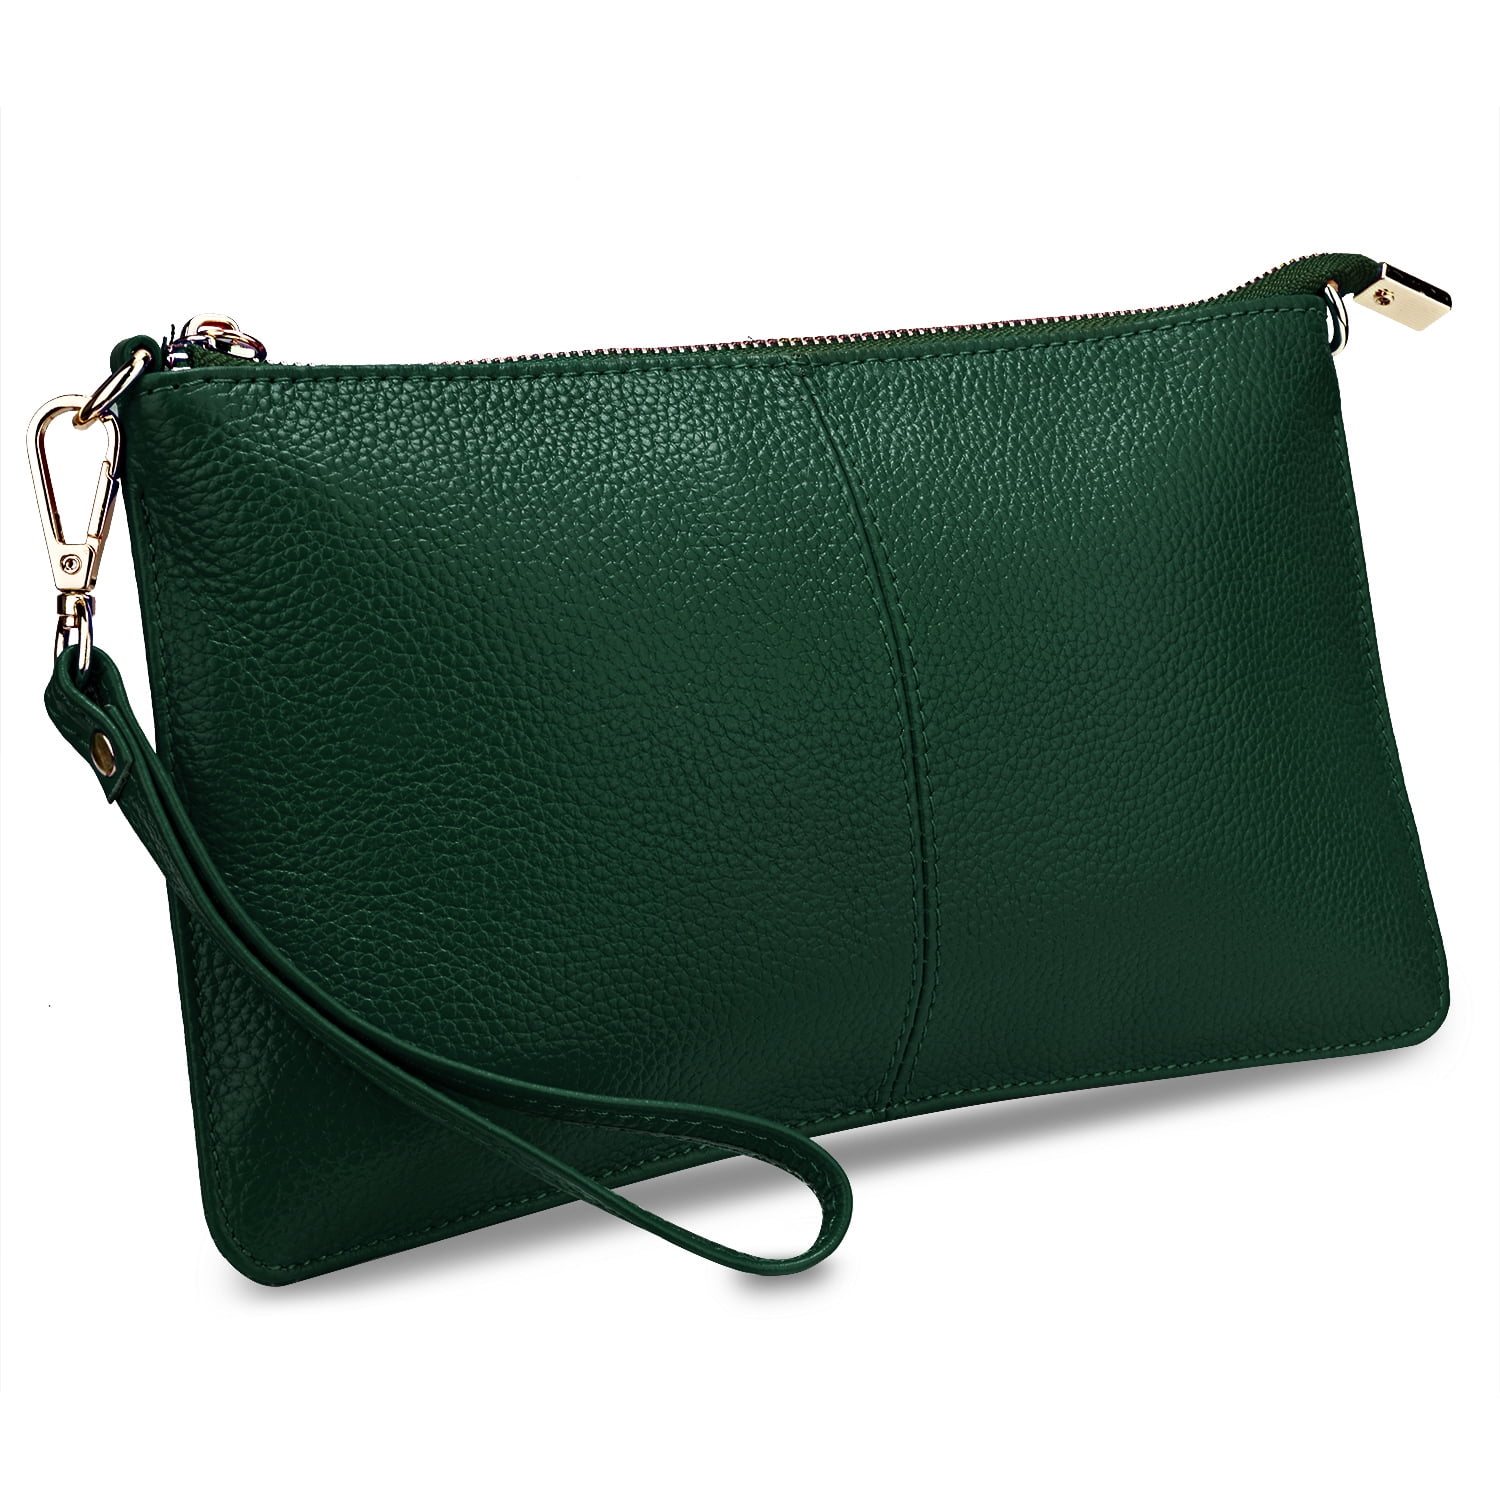 New Wallet Casual Solid Half Moon Evening Bag Women Pearl Green Acrylic Clutch  Purse Chic Beauty Case Chains Party Flap Handbags